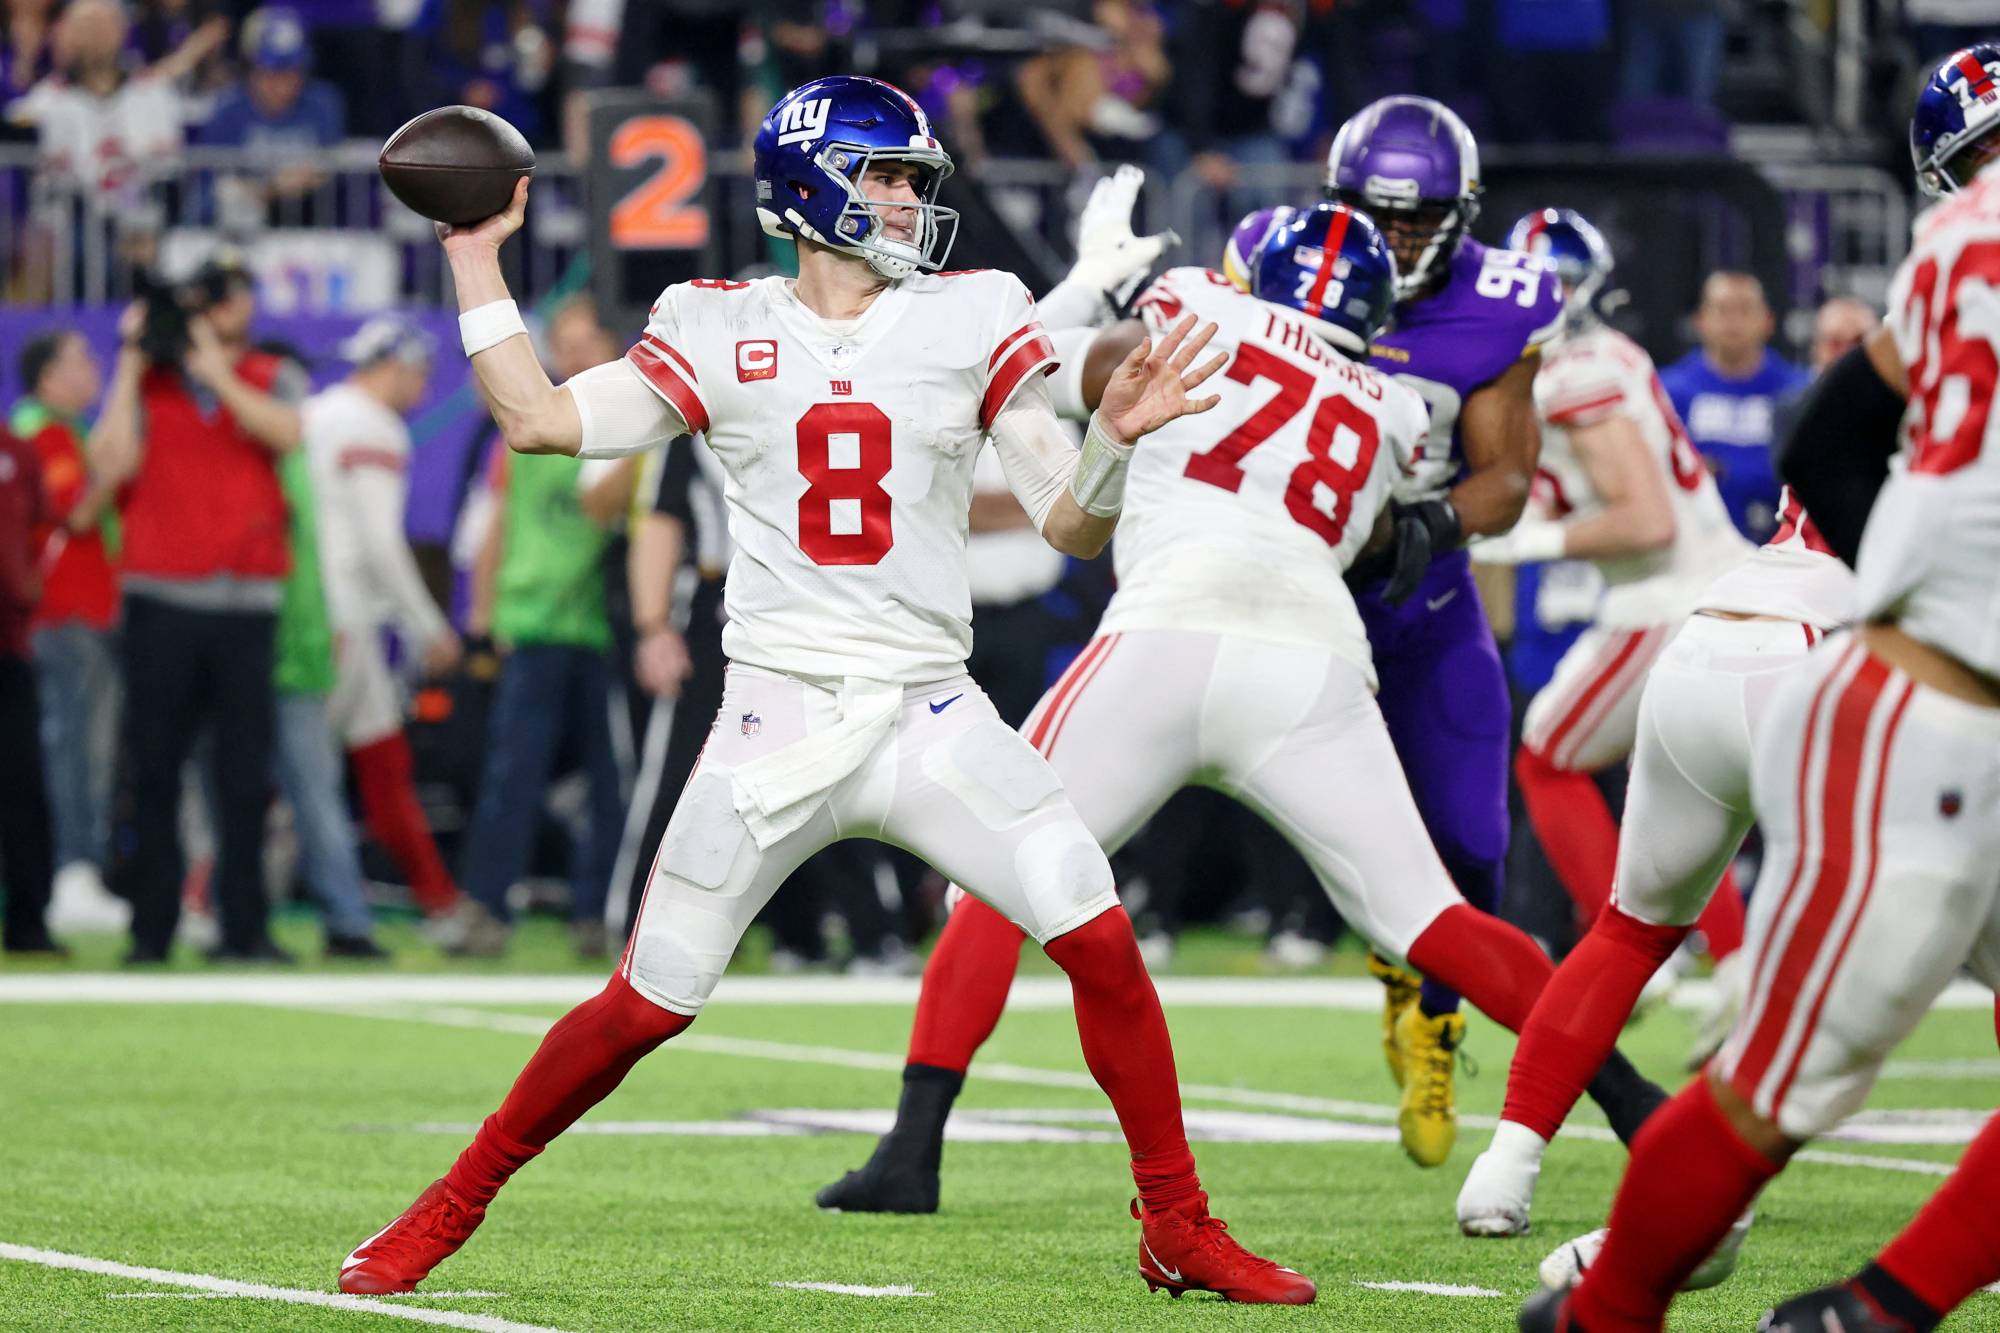 How to get Giants-Vikings 2023 NFL playoffs Wild Card tickets